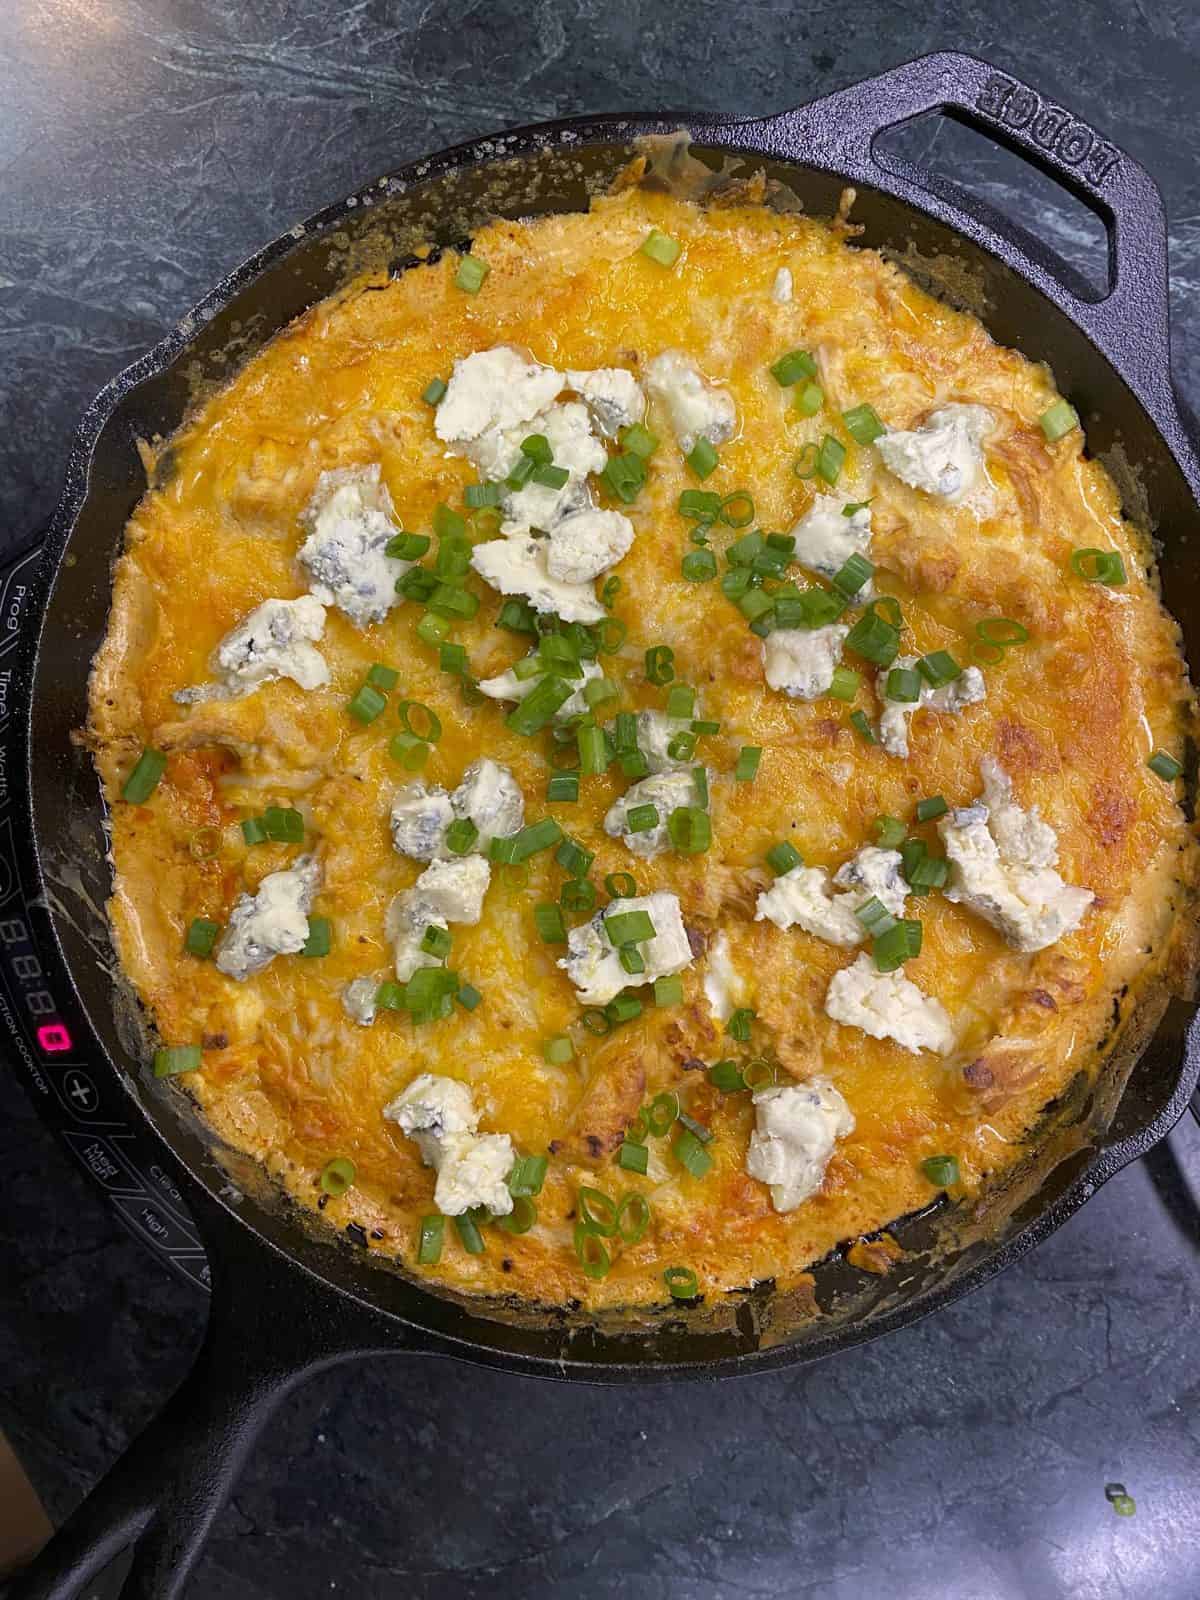 Buffalo chicken dip topped with blue cheese. recipe by foodology geek.